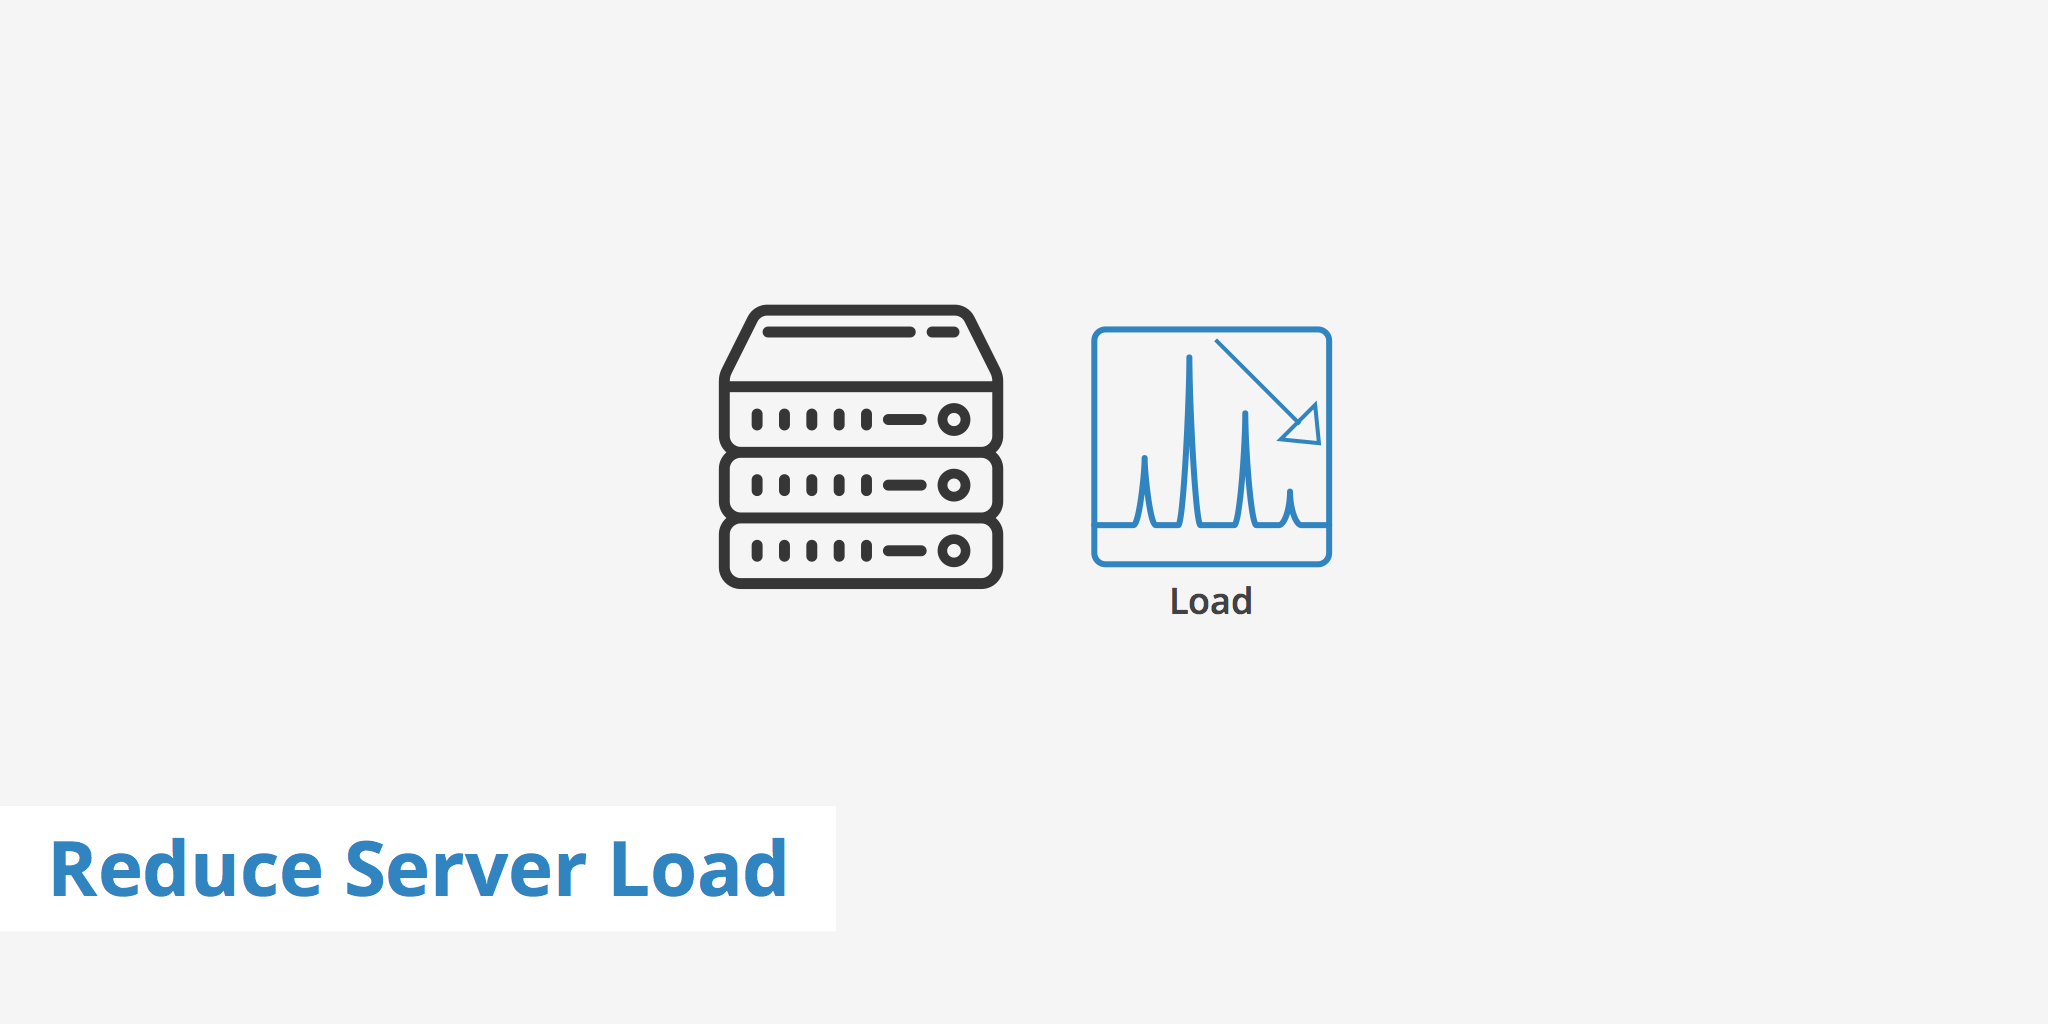 How to Reduce Server Load